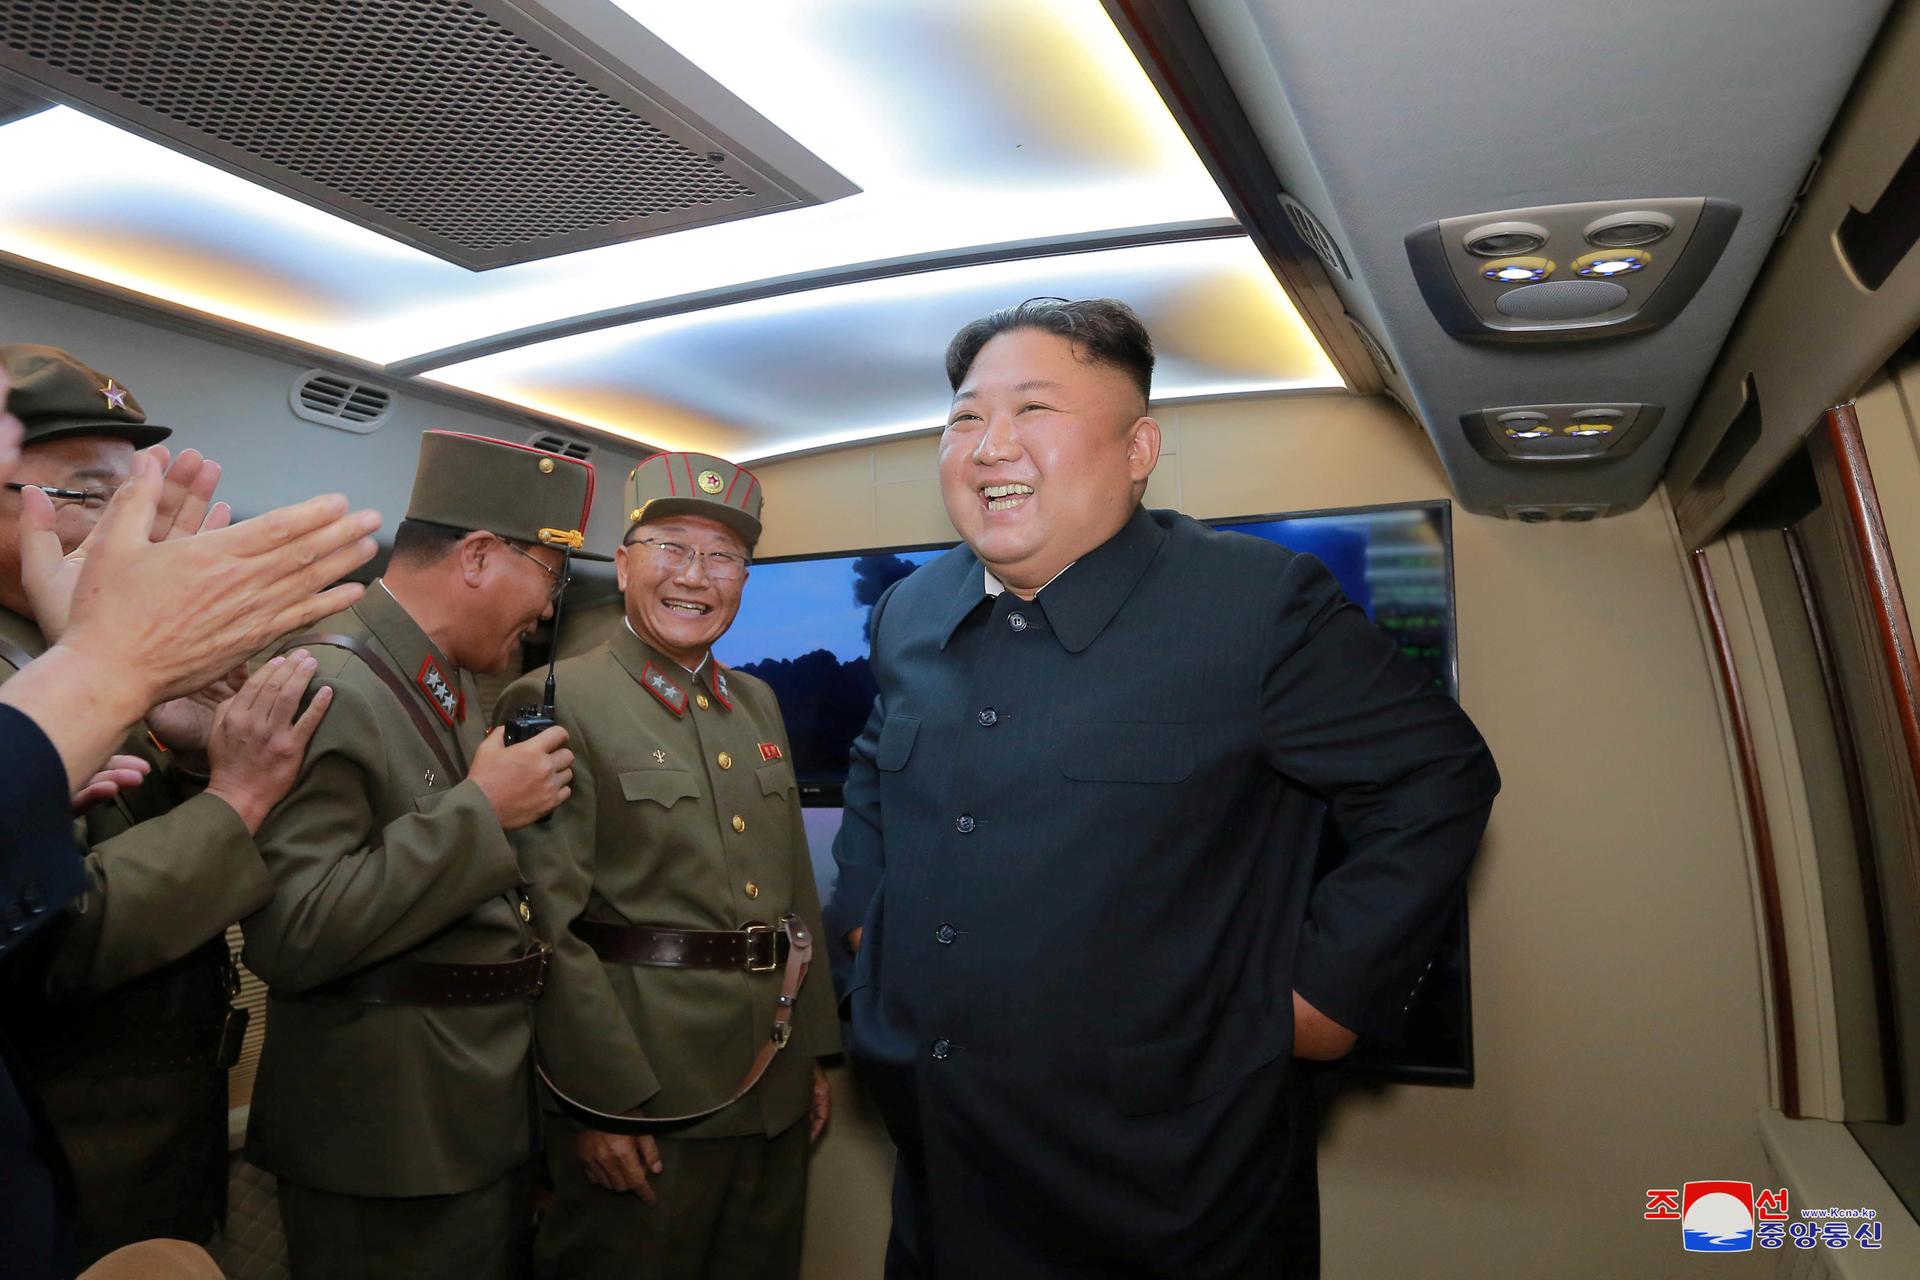 Kim Jong-un smiles in gray suit as he talks with men in green military uniforms